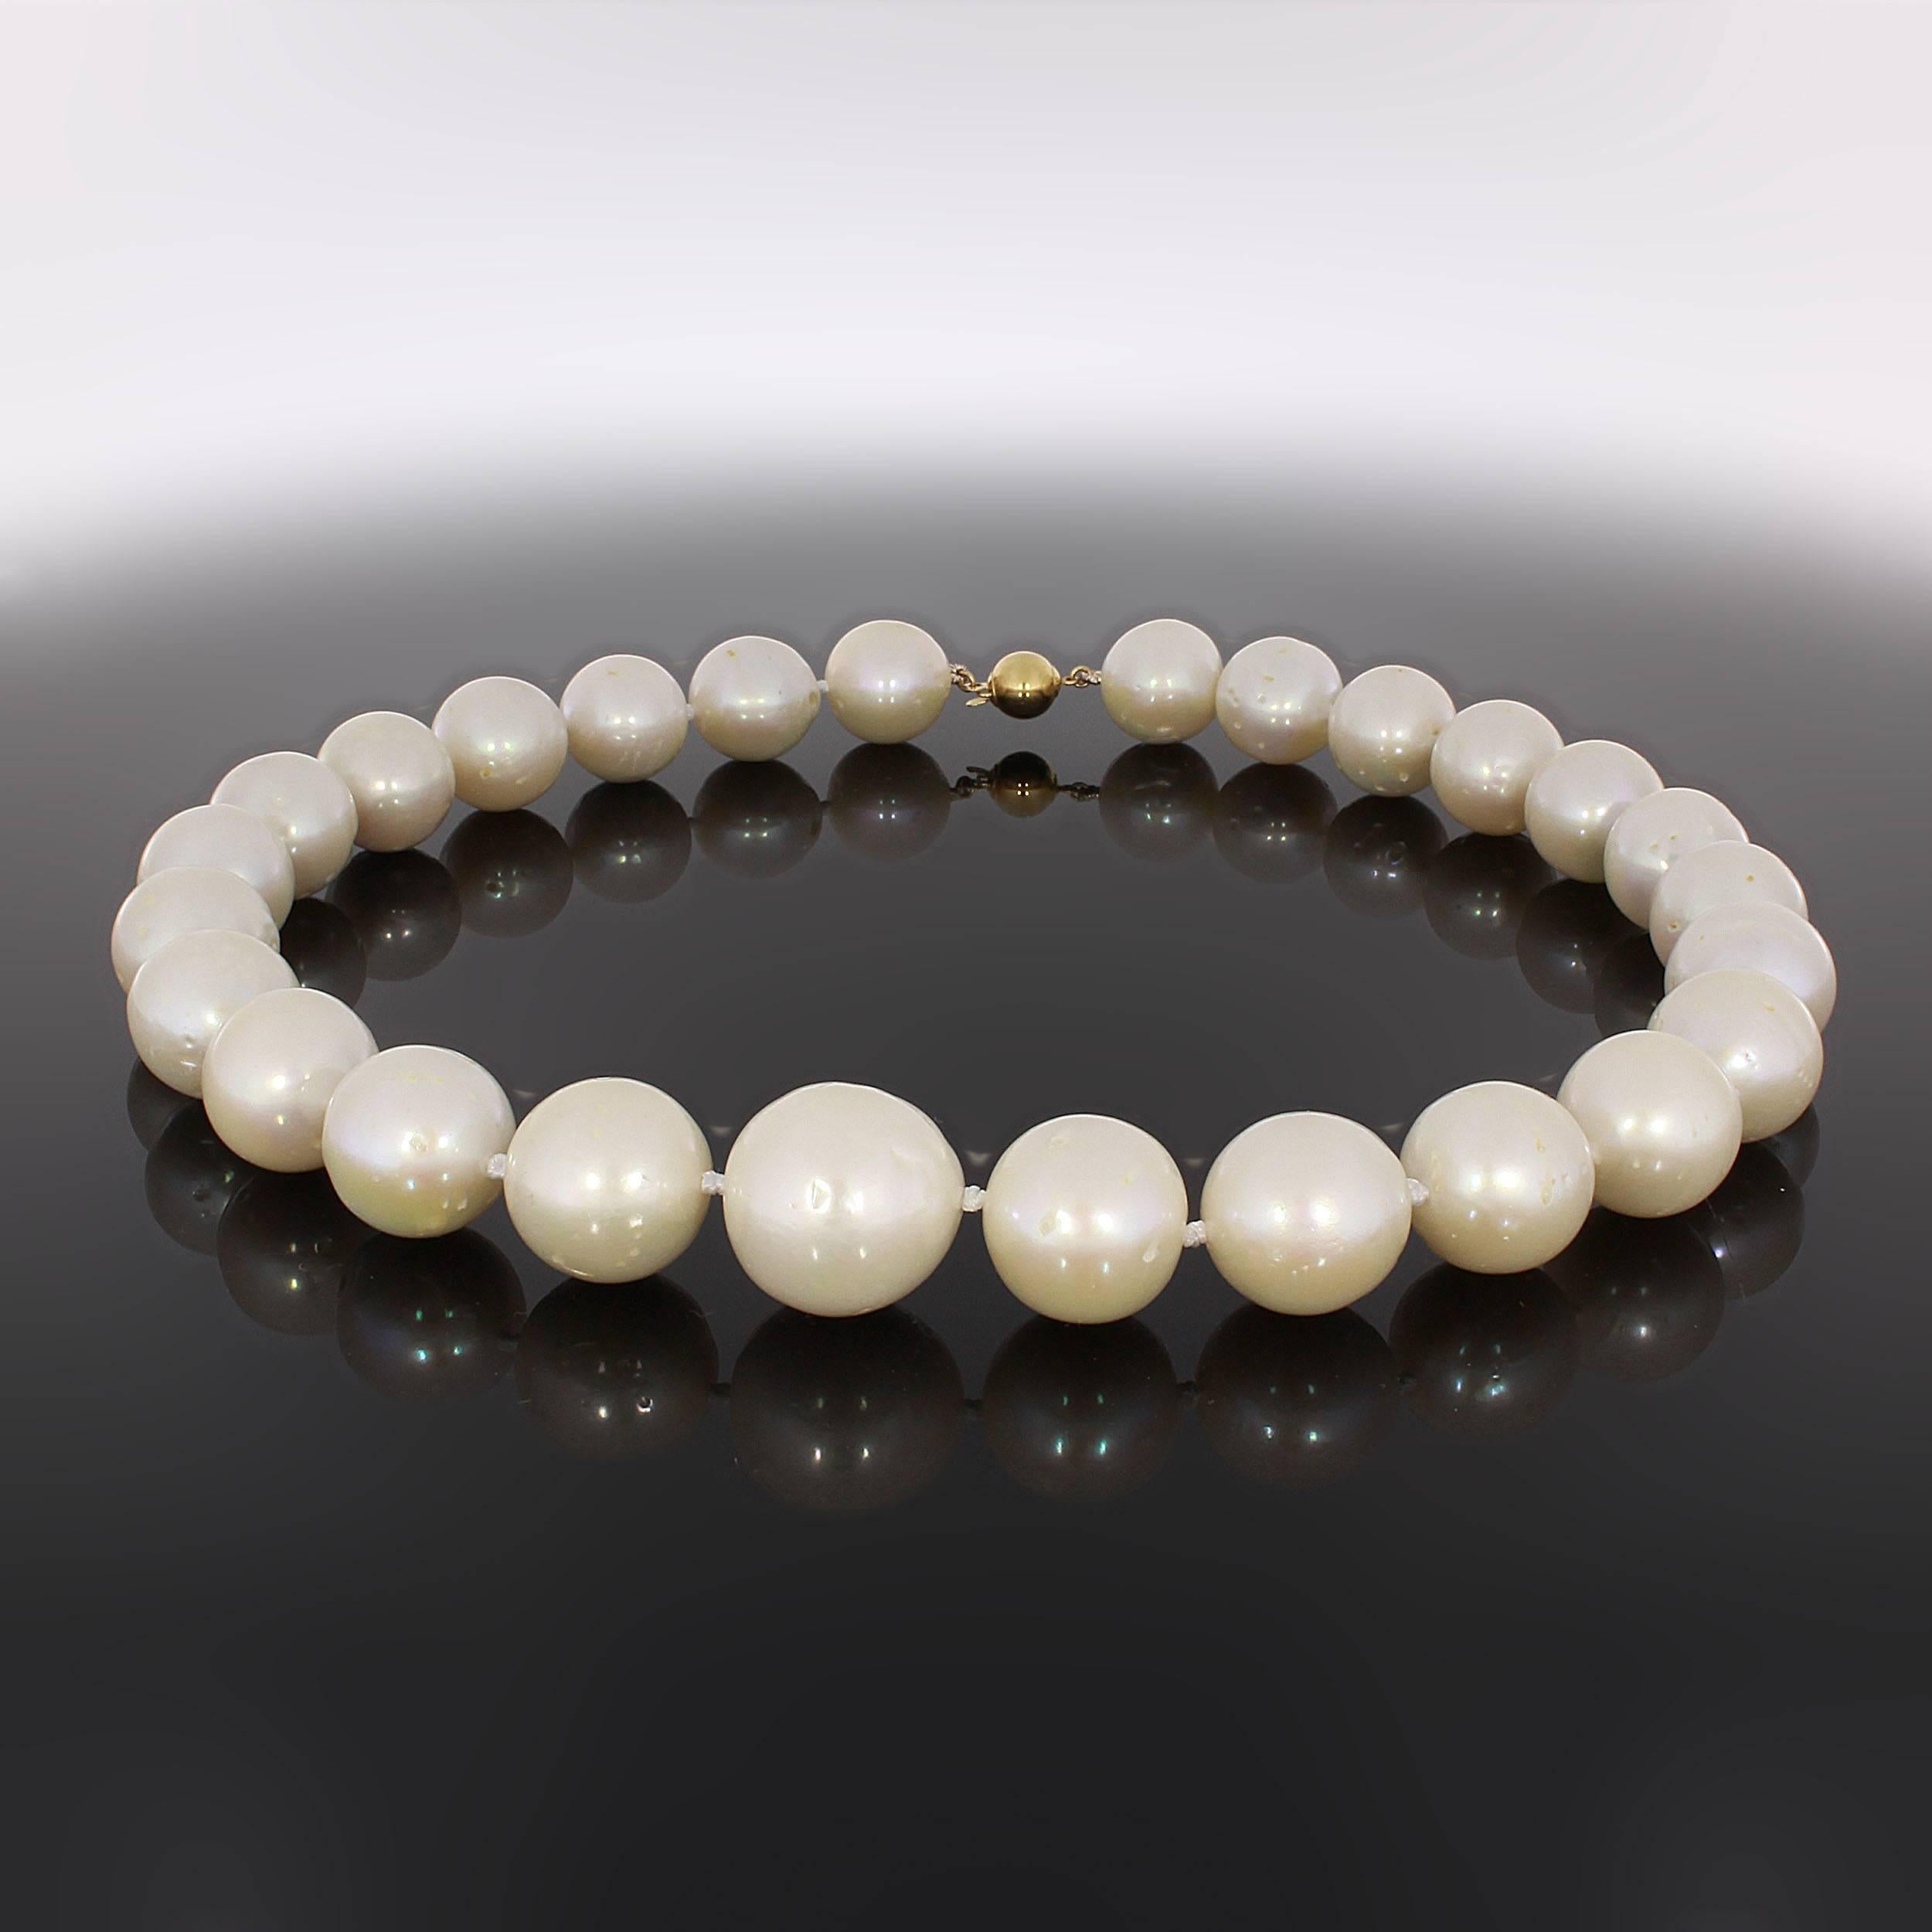 One strand of 26 South Sea pearls 12-15 mm in diameter. 
Completed by an 18 K yellow gold rondel clasp. Total weight: 128,8 grams.
Length: 17.72 in ( 45 cm )